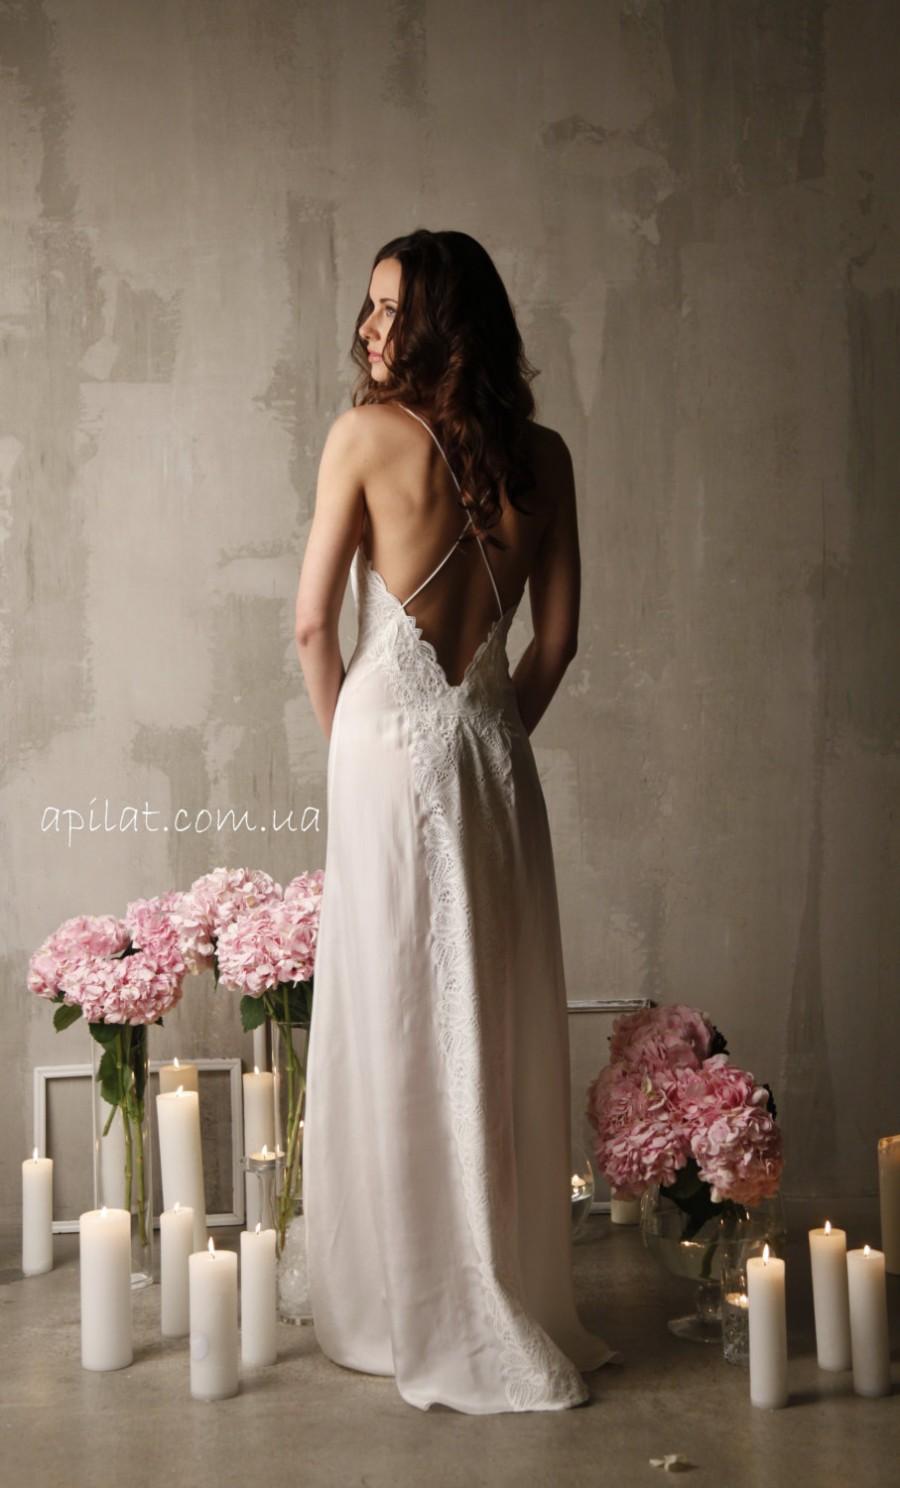 Wedding - Long Silk Bridal Nightgown With Open Back and Lace F12(Lingerie, Nightdress), Bridal Lingerie, Wedding Lingerie, Honeymoon, Christmas Gifts